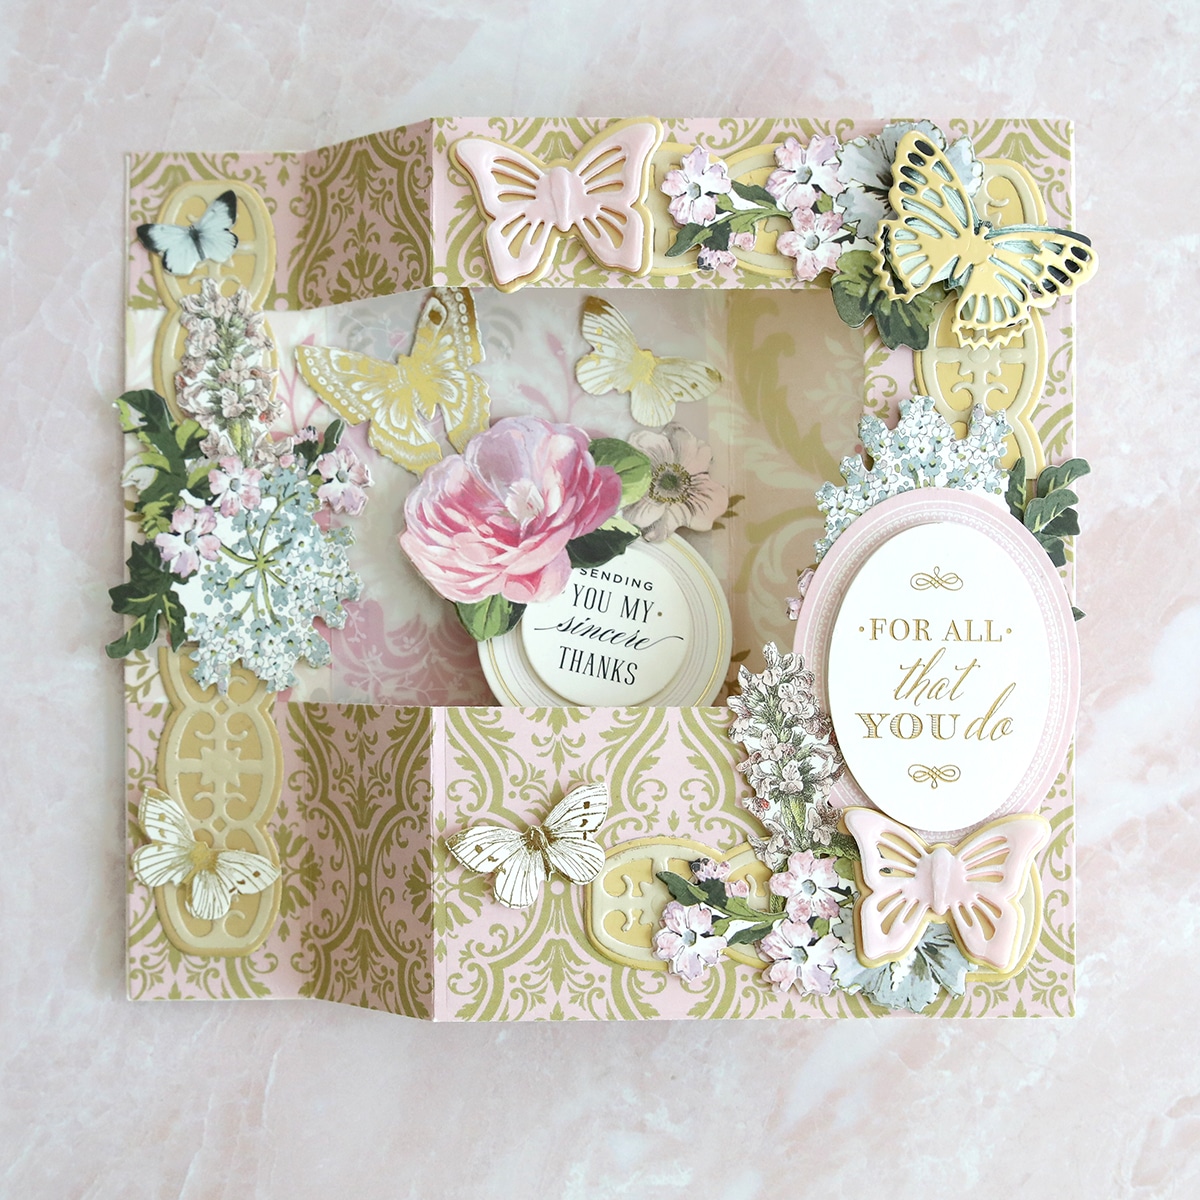 a close up of a card with flowers and butterflies.